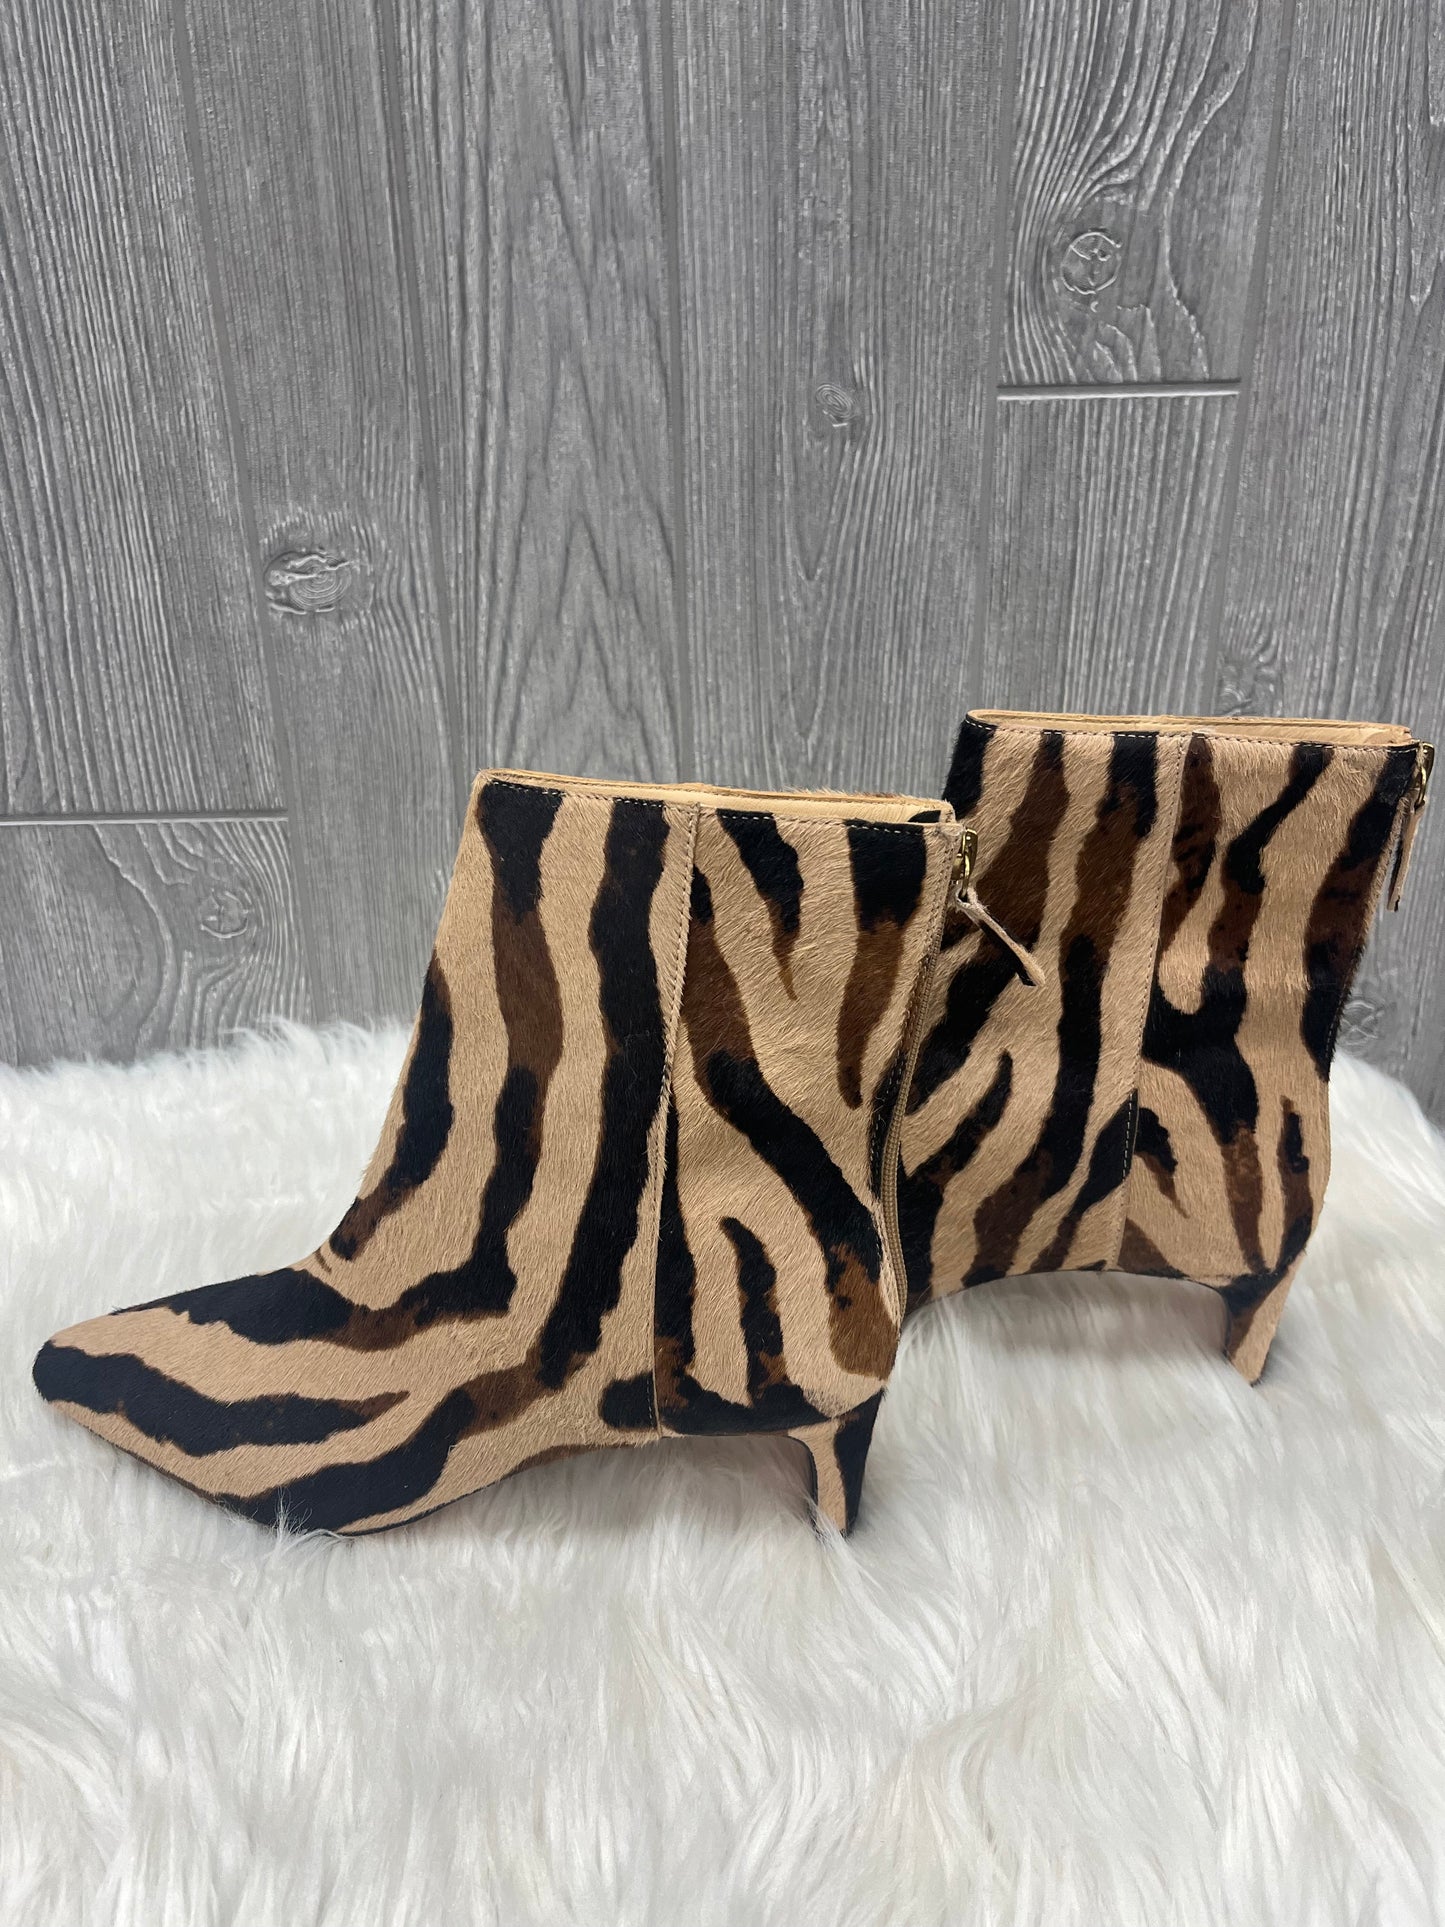 Boots Mid-calf Heels By J Crew  Size: 8